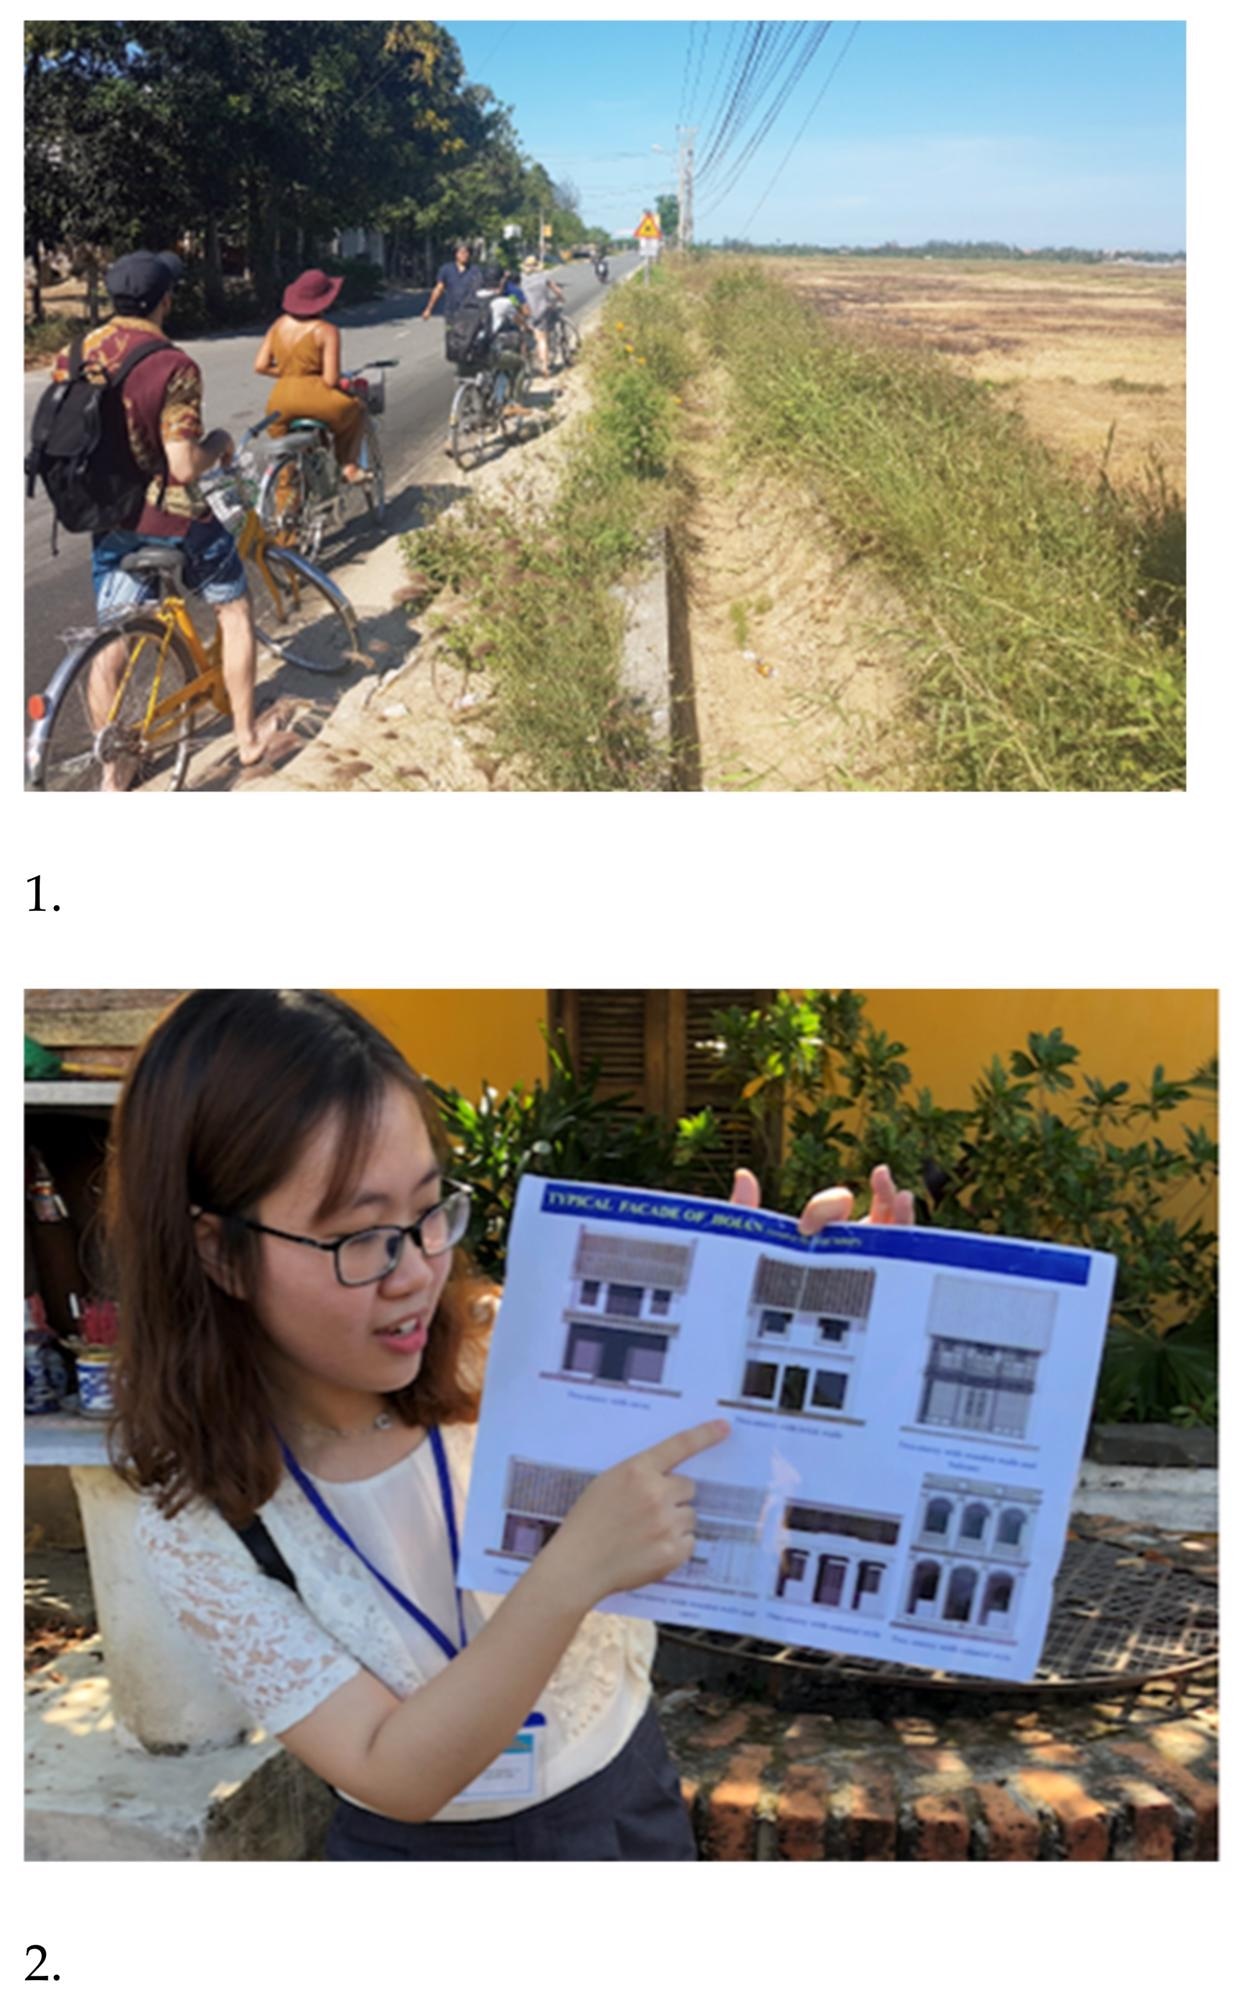 Images of the learning activities in the H?i An case study. 1. Site familiarization: Group cycle trip to identify infrastructure vulnerabilities along the road from H?i An to the coast. 2. Workshop by local experts: Heritage in H?i An.